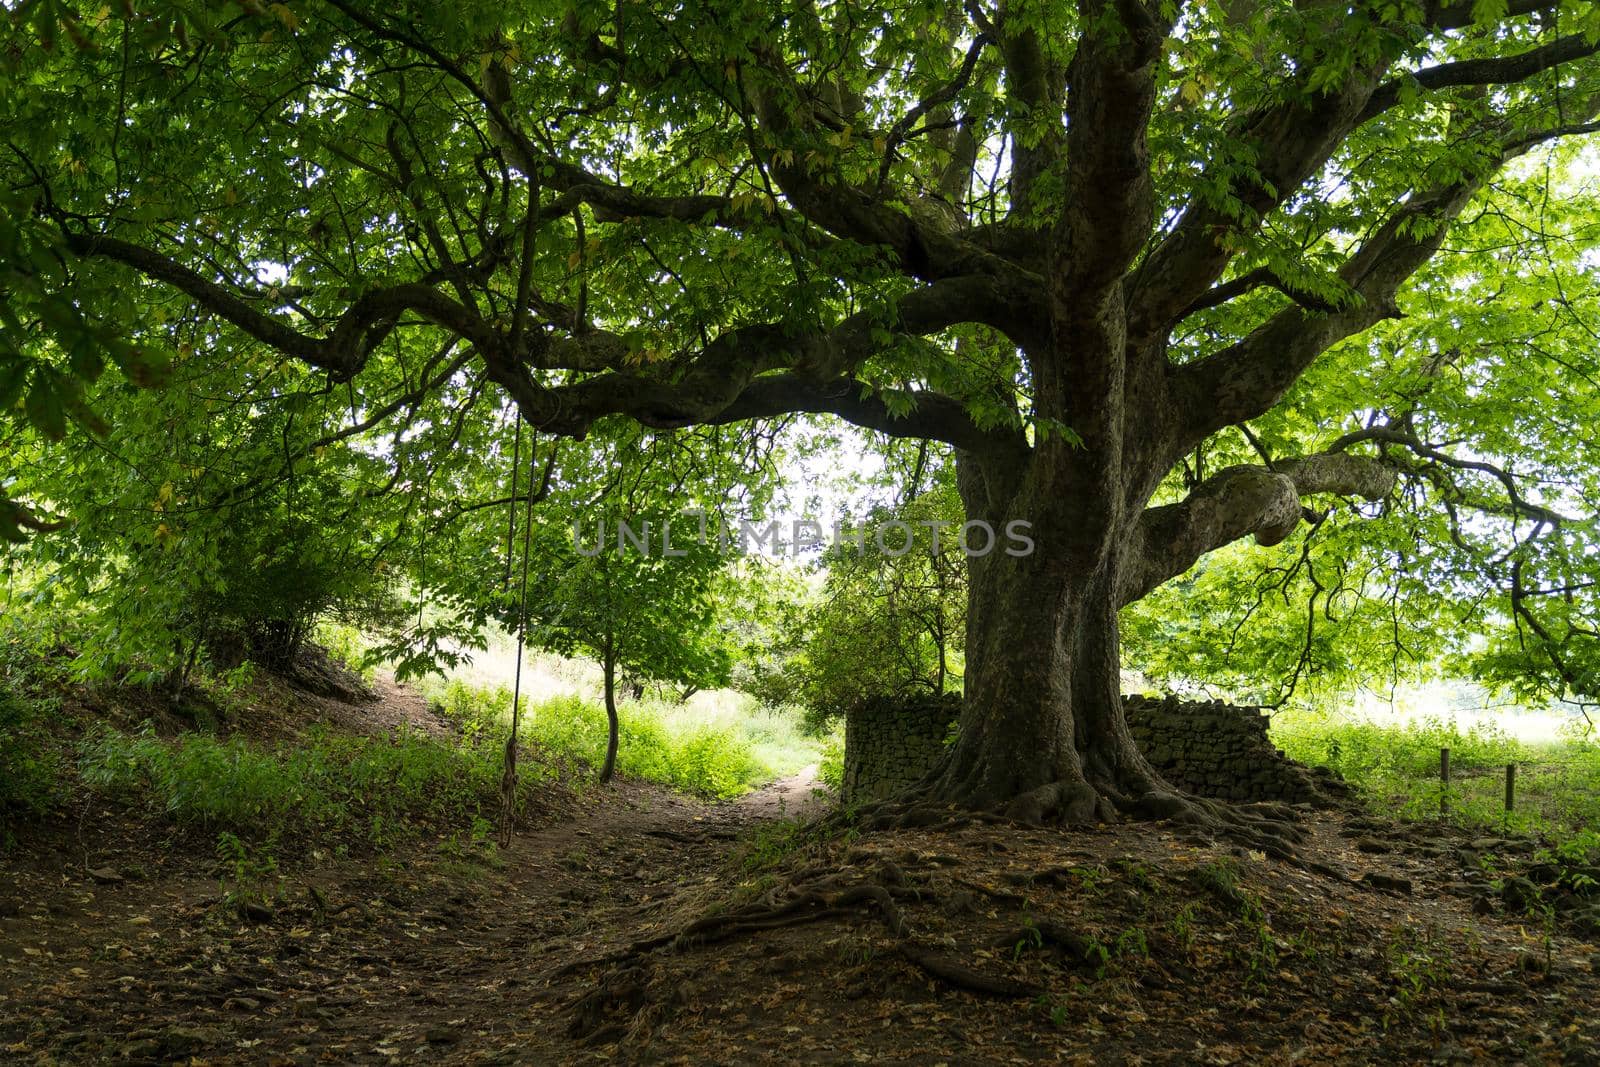 A Bottom to top view of a PLane tree trunk and branches with a ditch and a footpath underneath. Near Abbotsbury, England, United Kingdom